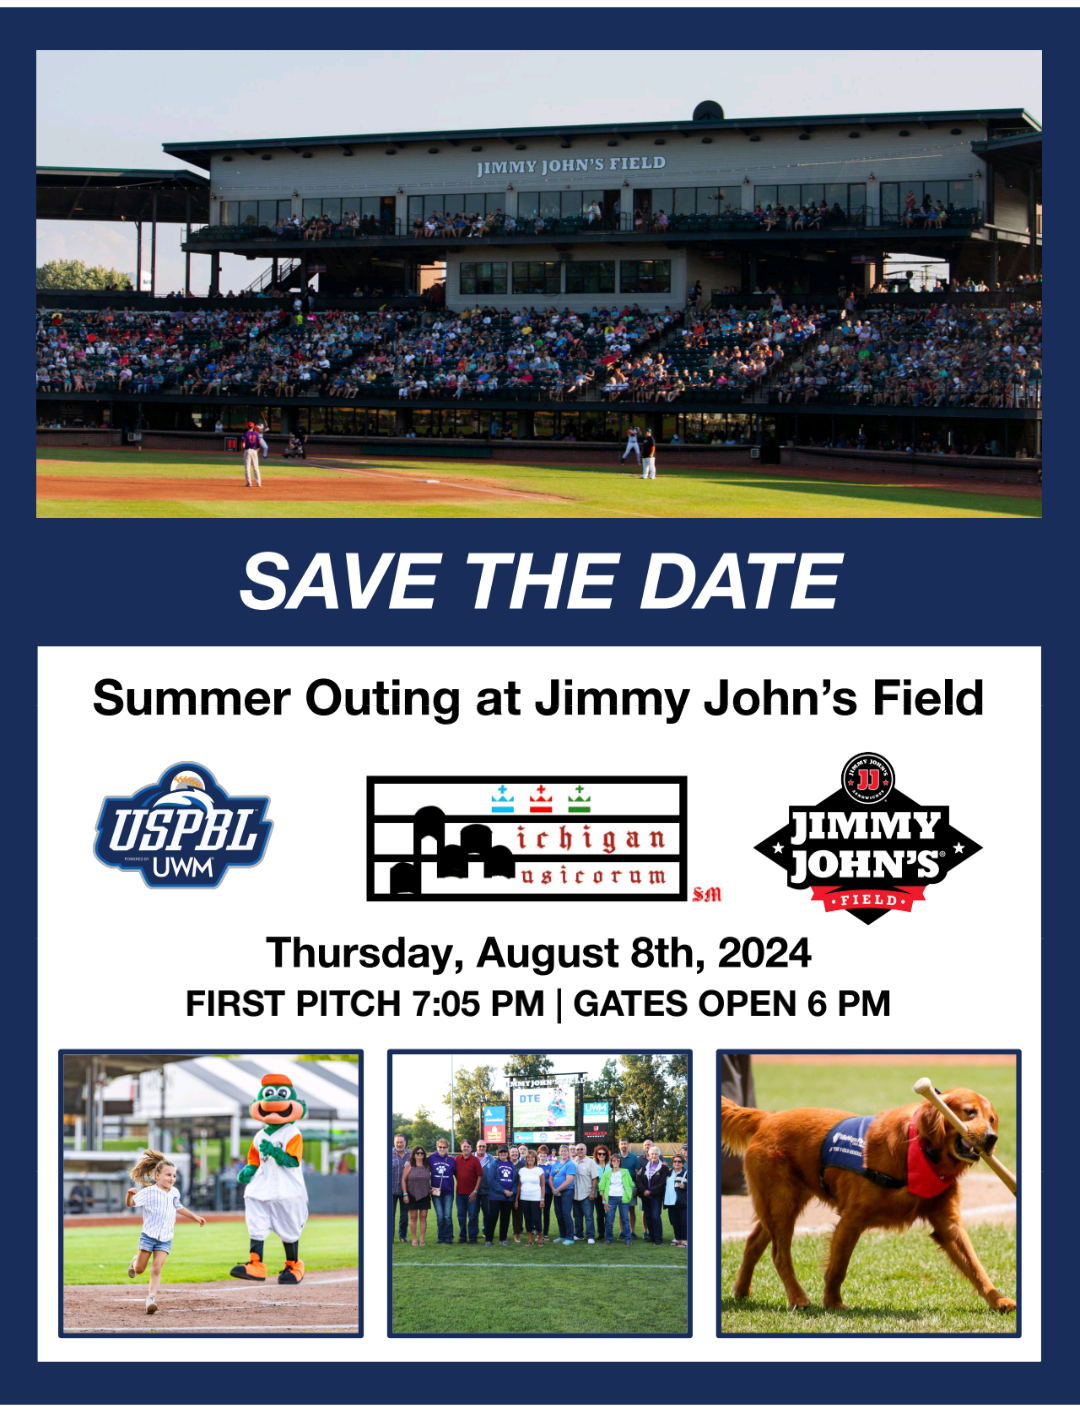 Members of the Michigan Musicorum will be singing the National Anthem once again at Jimmy John's Baseball Field in Utica, MI on Thursday, August 8th, 2024 at the 7:05pm ballgame!  For more info, please click on the ad flyer above @ uspbl.com.  Many thanks to the United Shore Professional Baseball League & Jimmy John's Baseball Field for this above ad flyer!